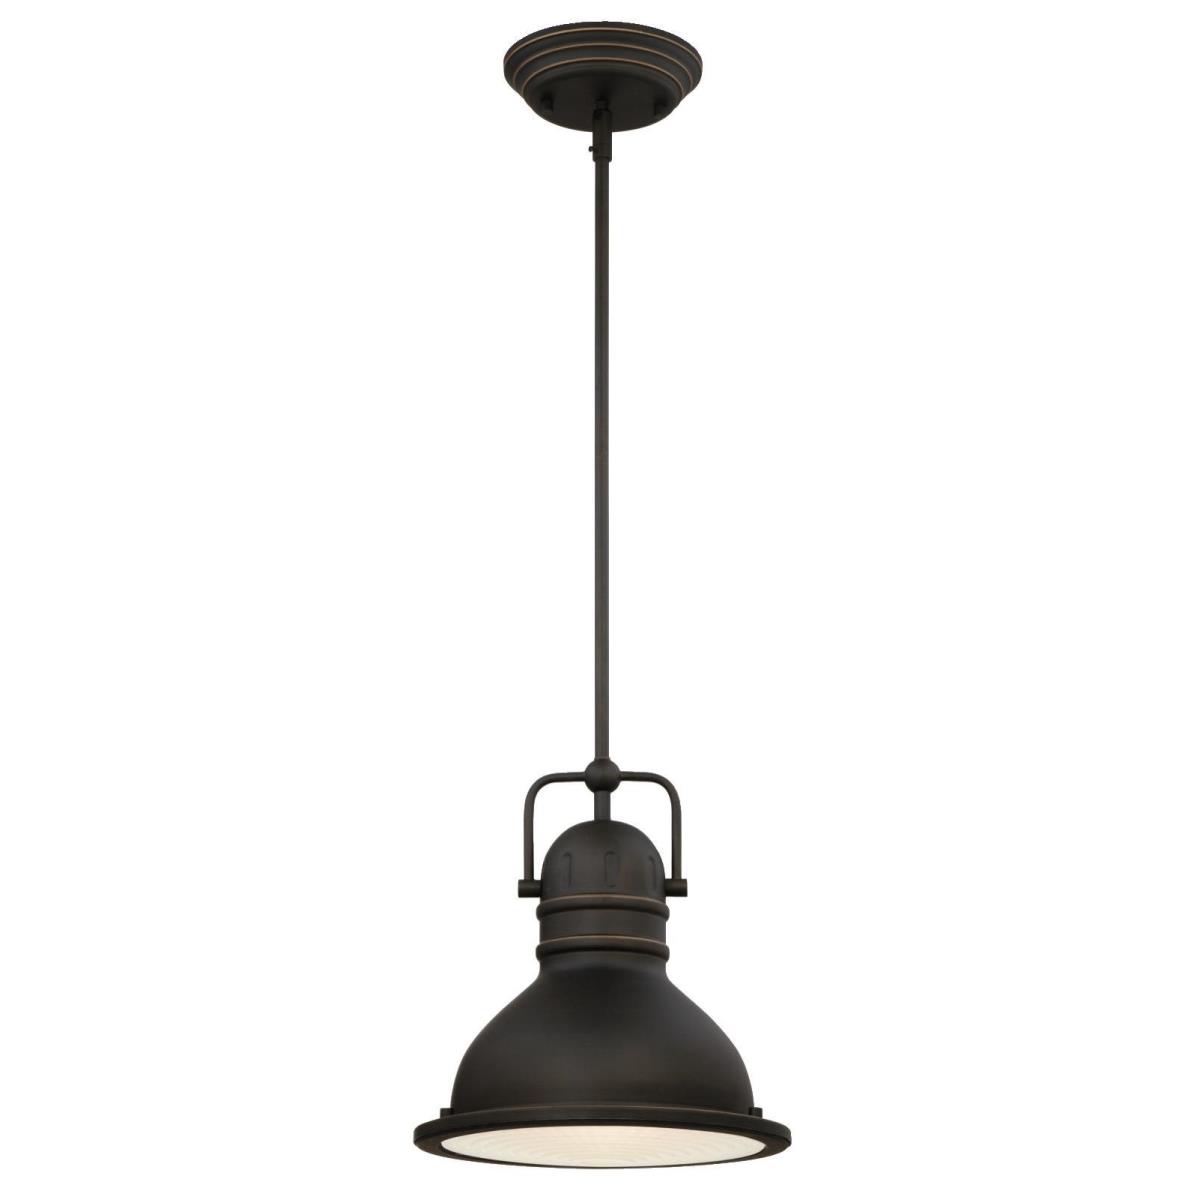 1 Light LED Pendant Oil Rubbed Bronze Finish with Highlights and Prismatic Lens